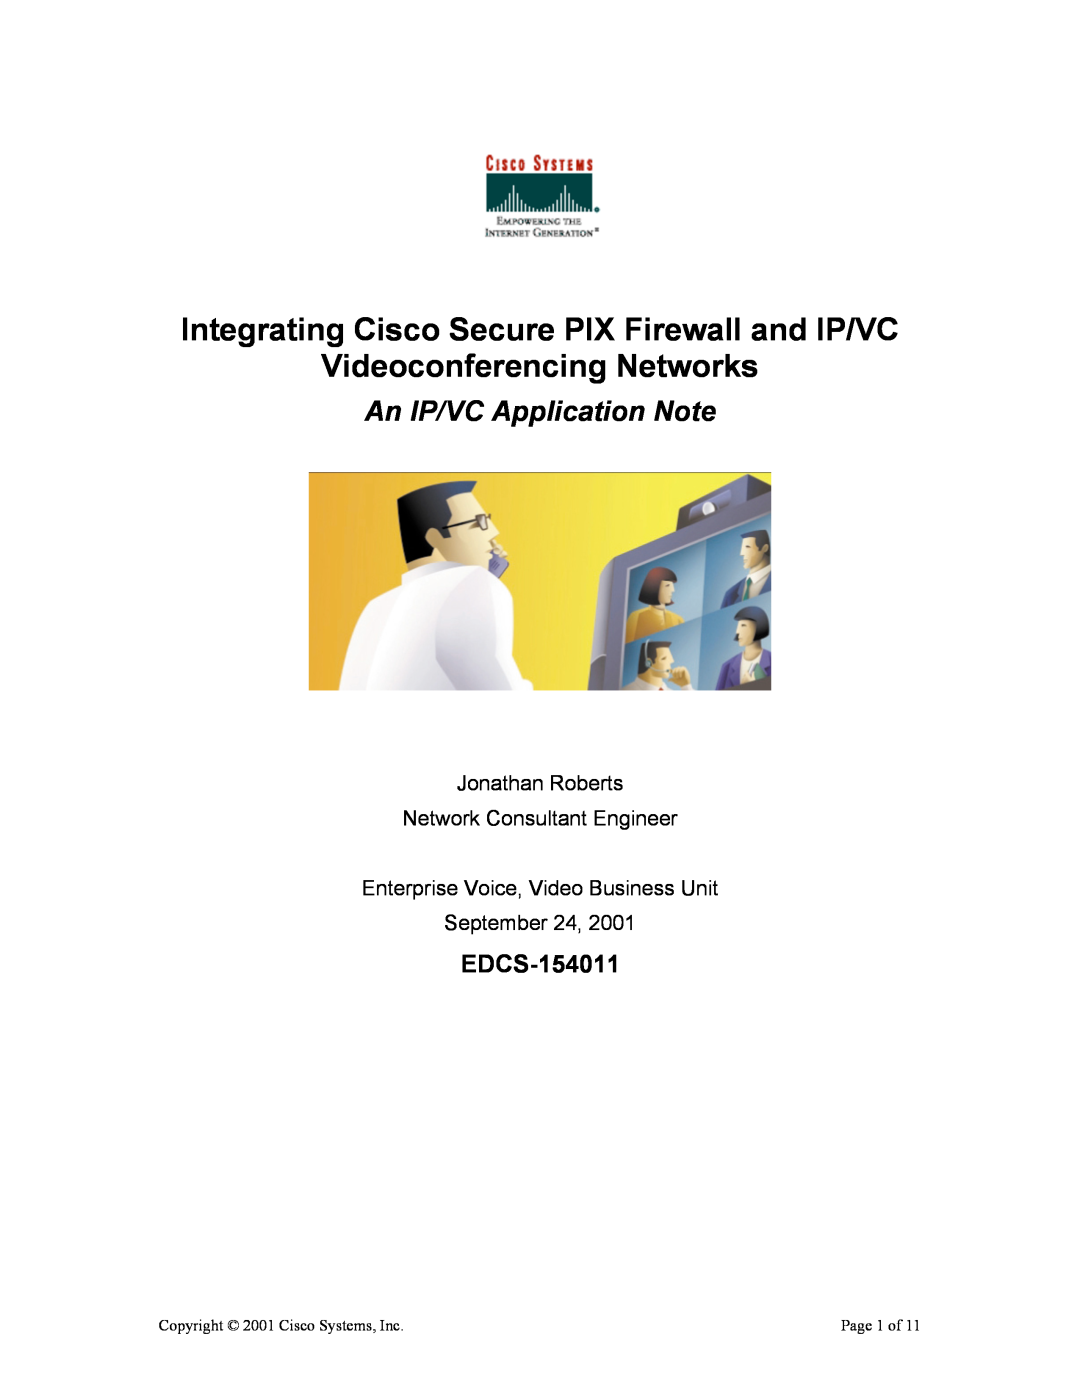 Cisco Systems EDCS-154011 manual Integrating Cisco Secure PIX Firewall and IP/VC, Videoconferencing Networks, Page 1 of 